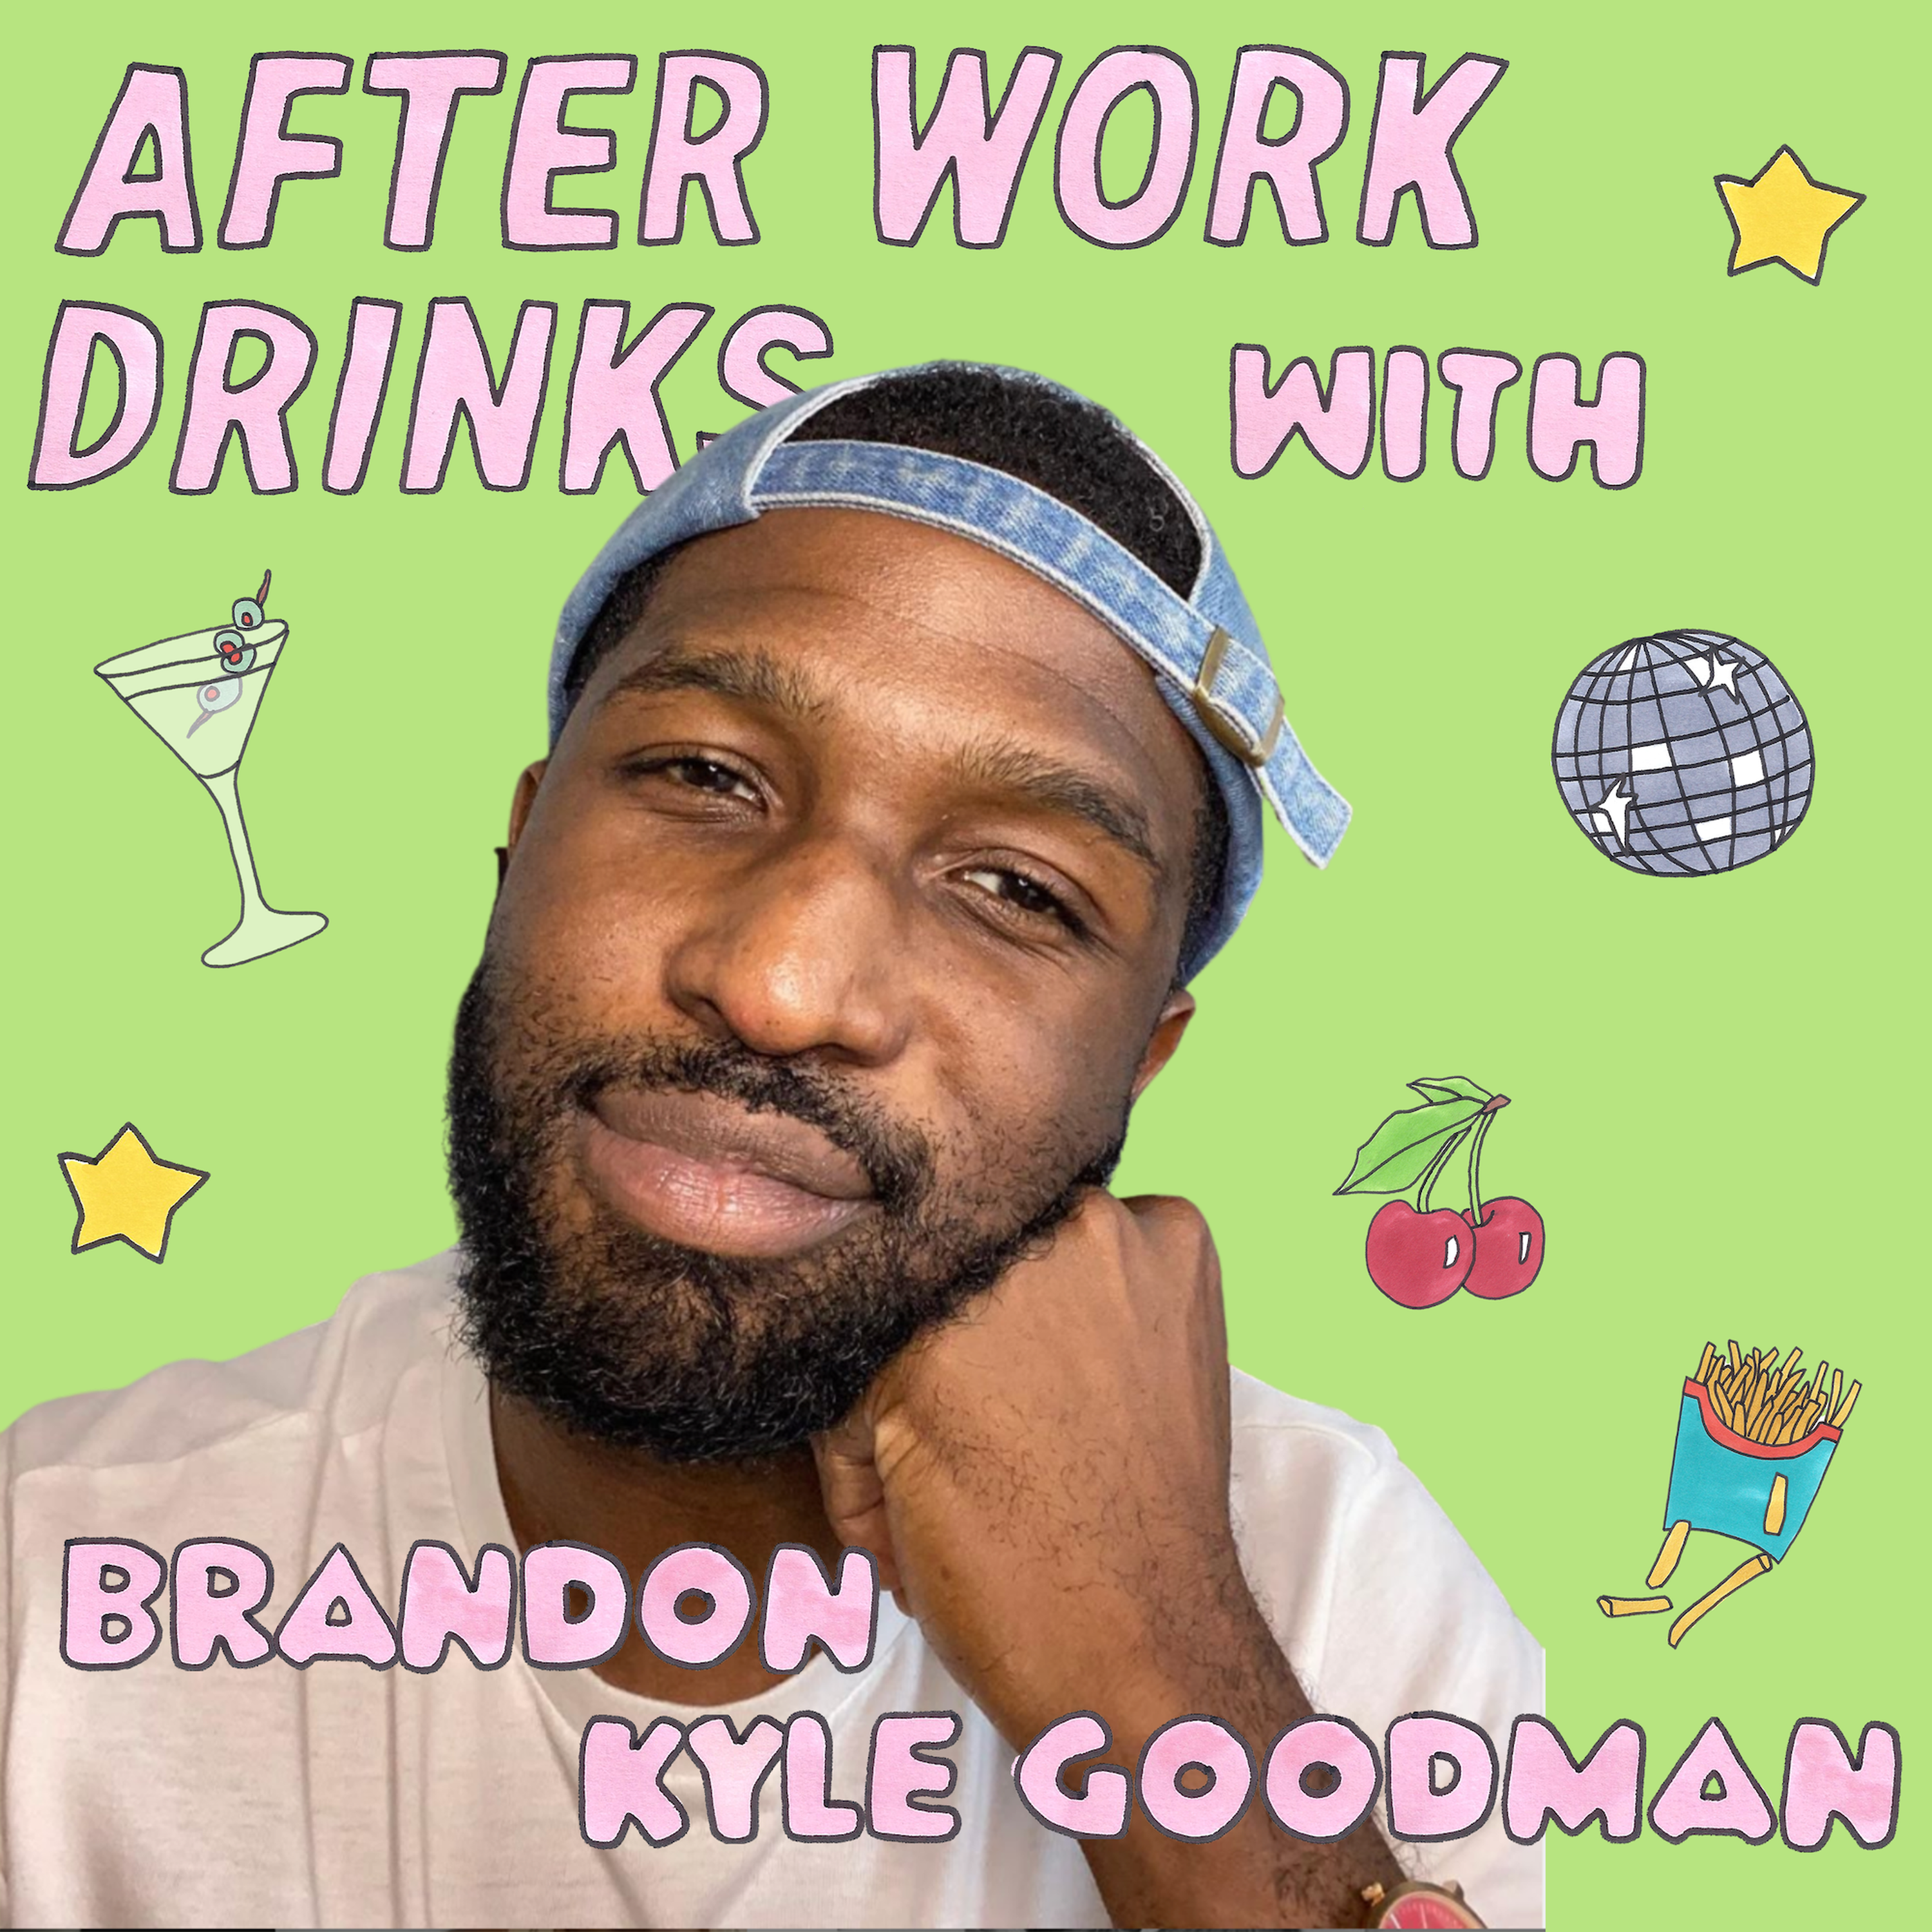 How To Be An Effective Ally With Brandon Kyle Goodman